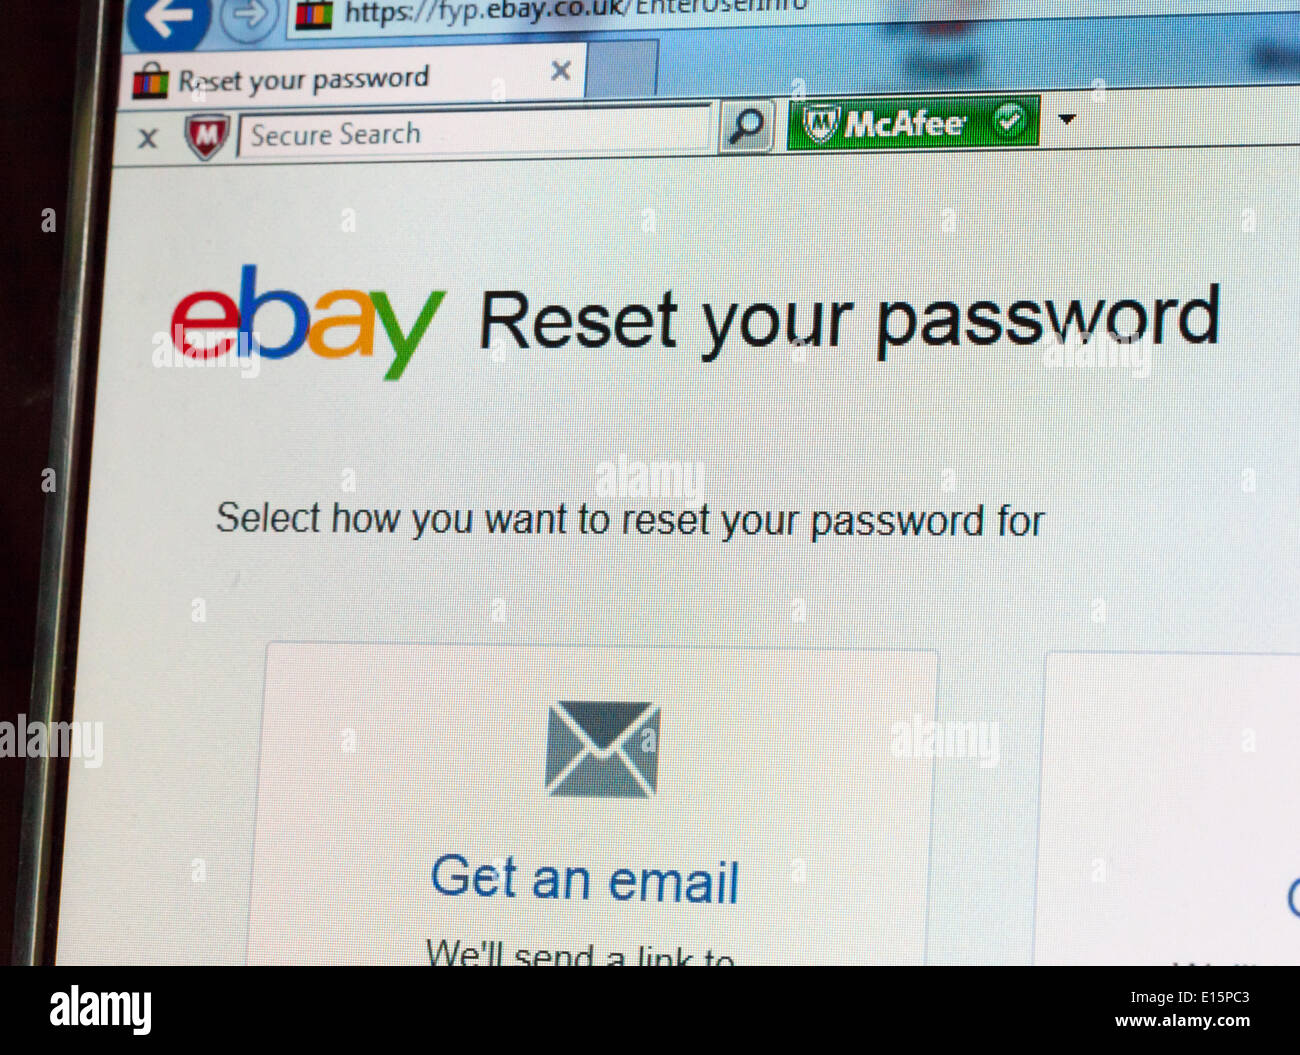 On 21st. May 2014 Online marketplace eBay said it is forcing users to change their passwords after a cyber-attack compromised its systems. The cyber-attackers accessed the information after obtaining 'a small number of employee log-in credentials', allowing them to access its systems. The compromised database contained names, passwords and other personal information. Credit:  John Keates/Alamy Live News Stock Photo